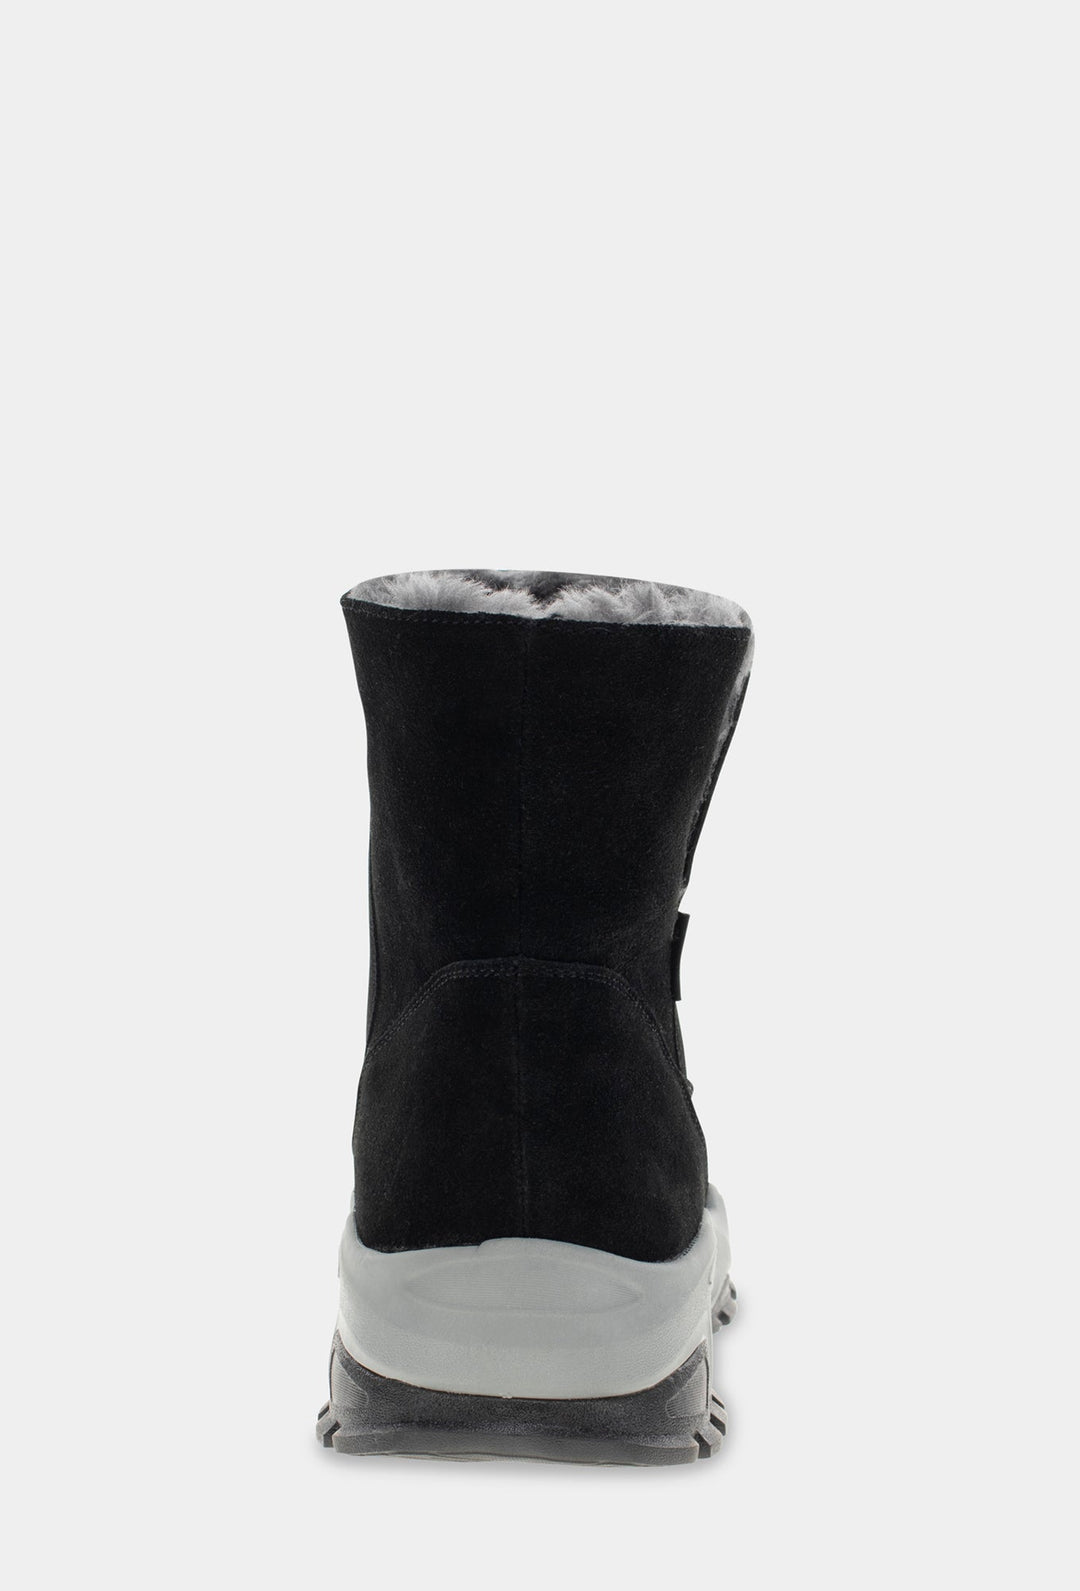 Lenox Cold Weather Boot - Black - Western Chief